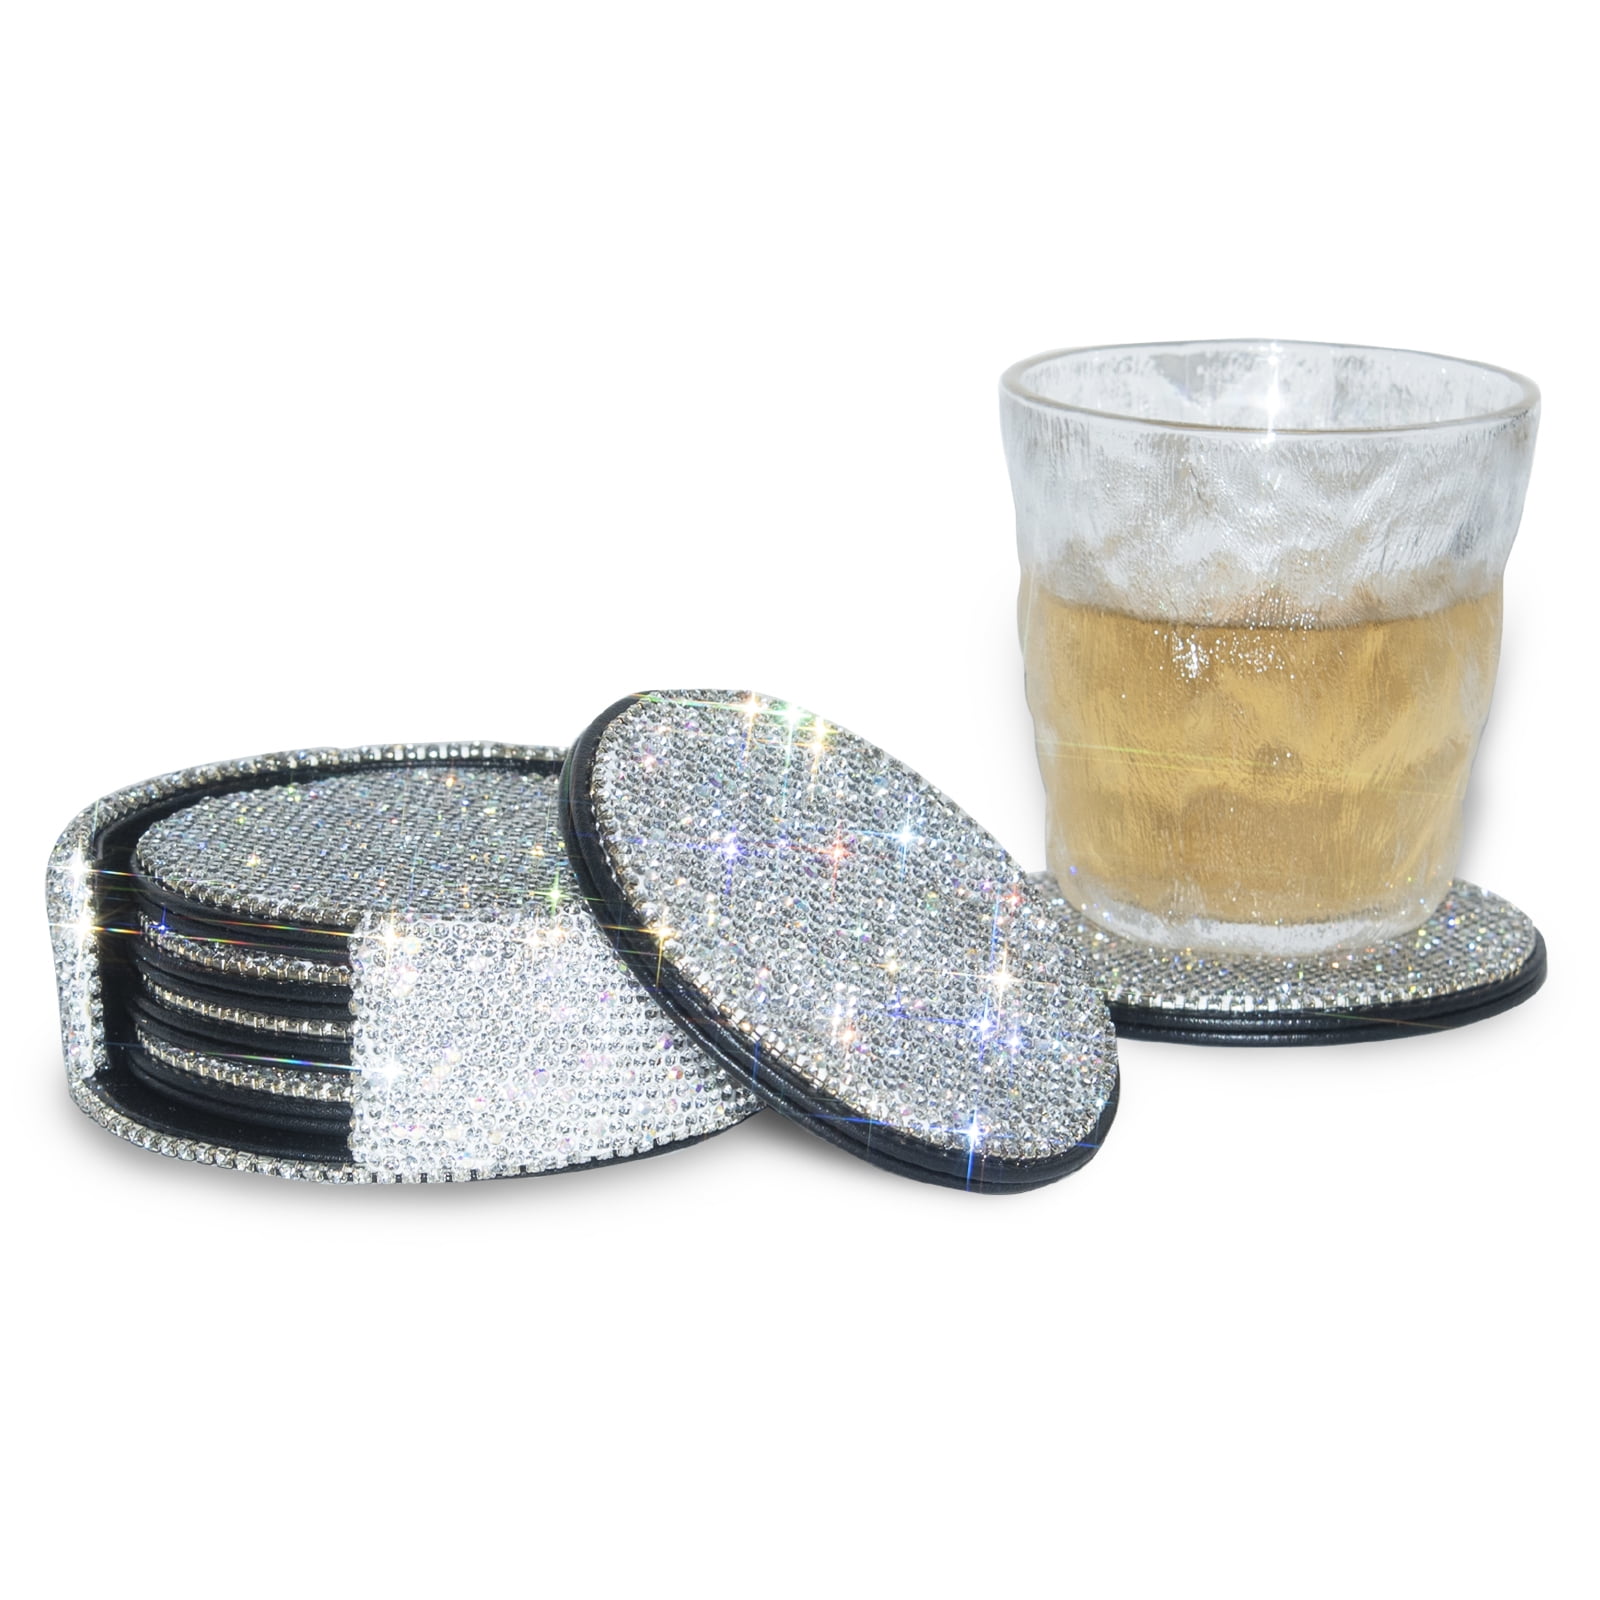 Coasters for Drinks Coffee Tea Cup Pads Table Mat with Coaster Holder for Home,Office,Kitchen,Bar,Bling Crystal Luxury Handmade Diamond Square 